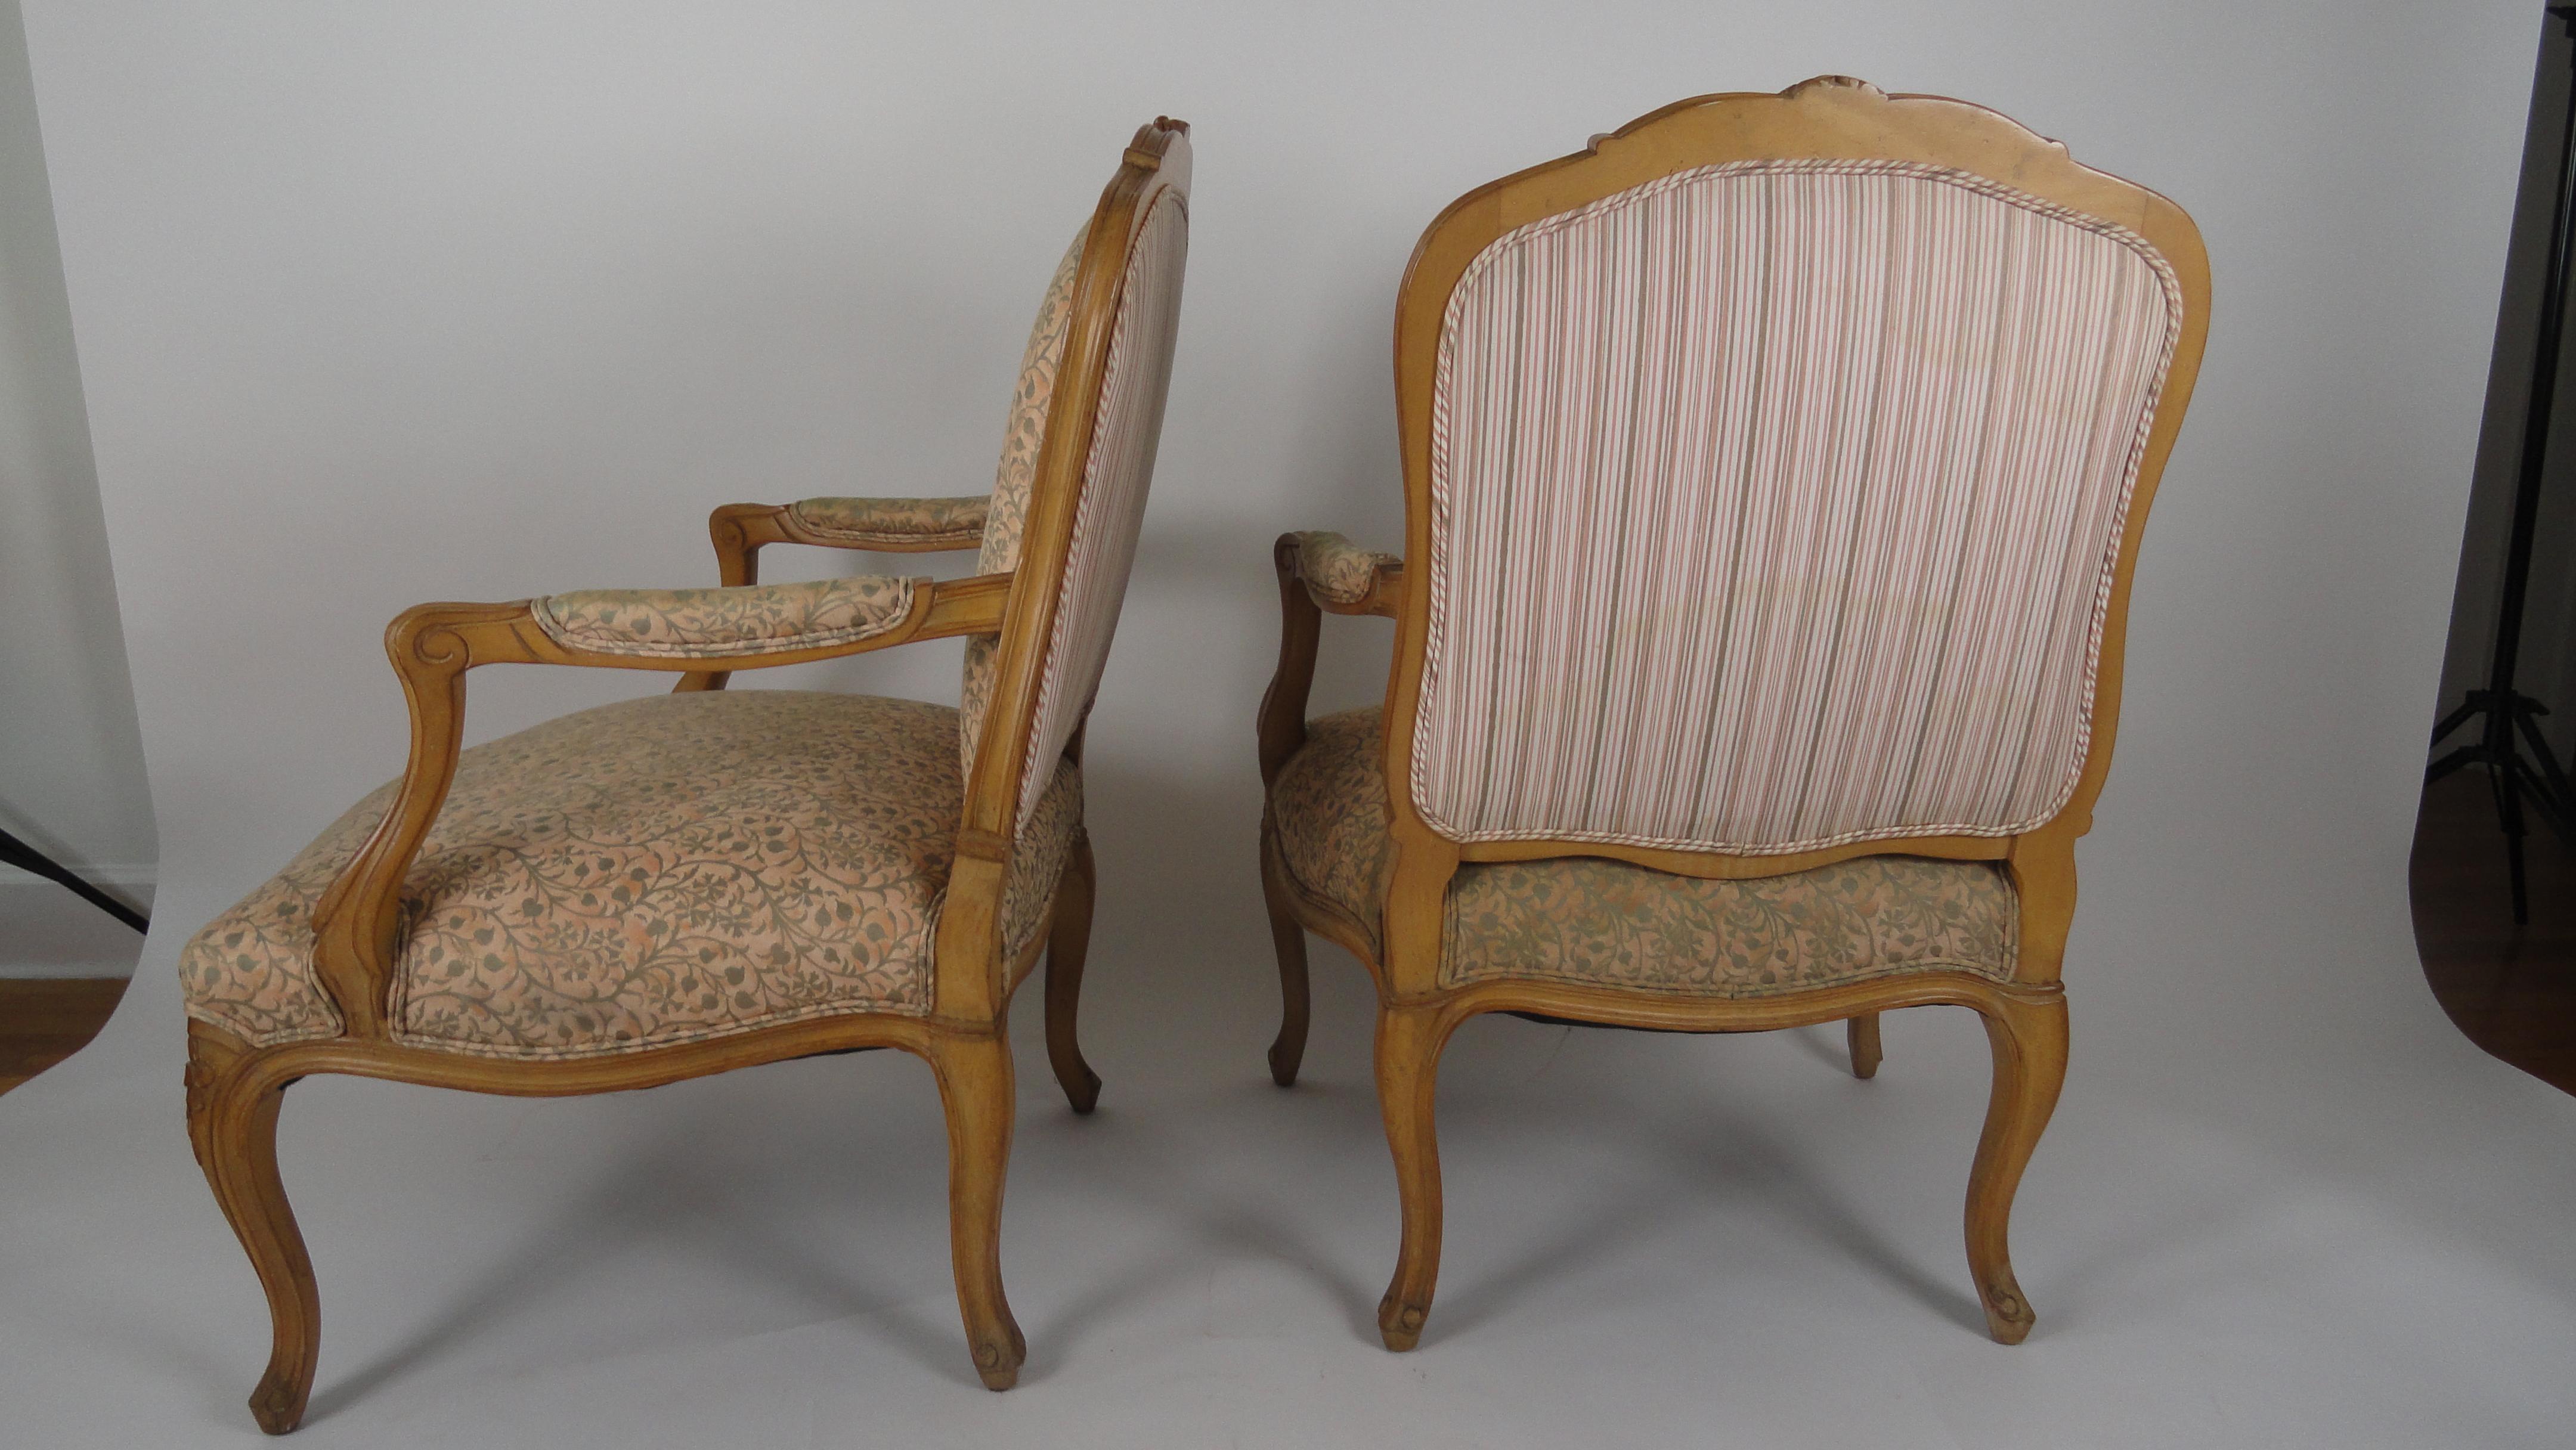 Pair of French open armchairs in the French Louis XV style. Cartouche shaped padded backs, padded down scrolled arms. Serpentine upholstered seats with curved detail on cabriole legs. Beautiful hand carving. Covered in Fortuny.